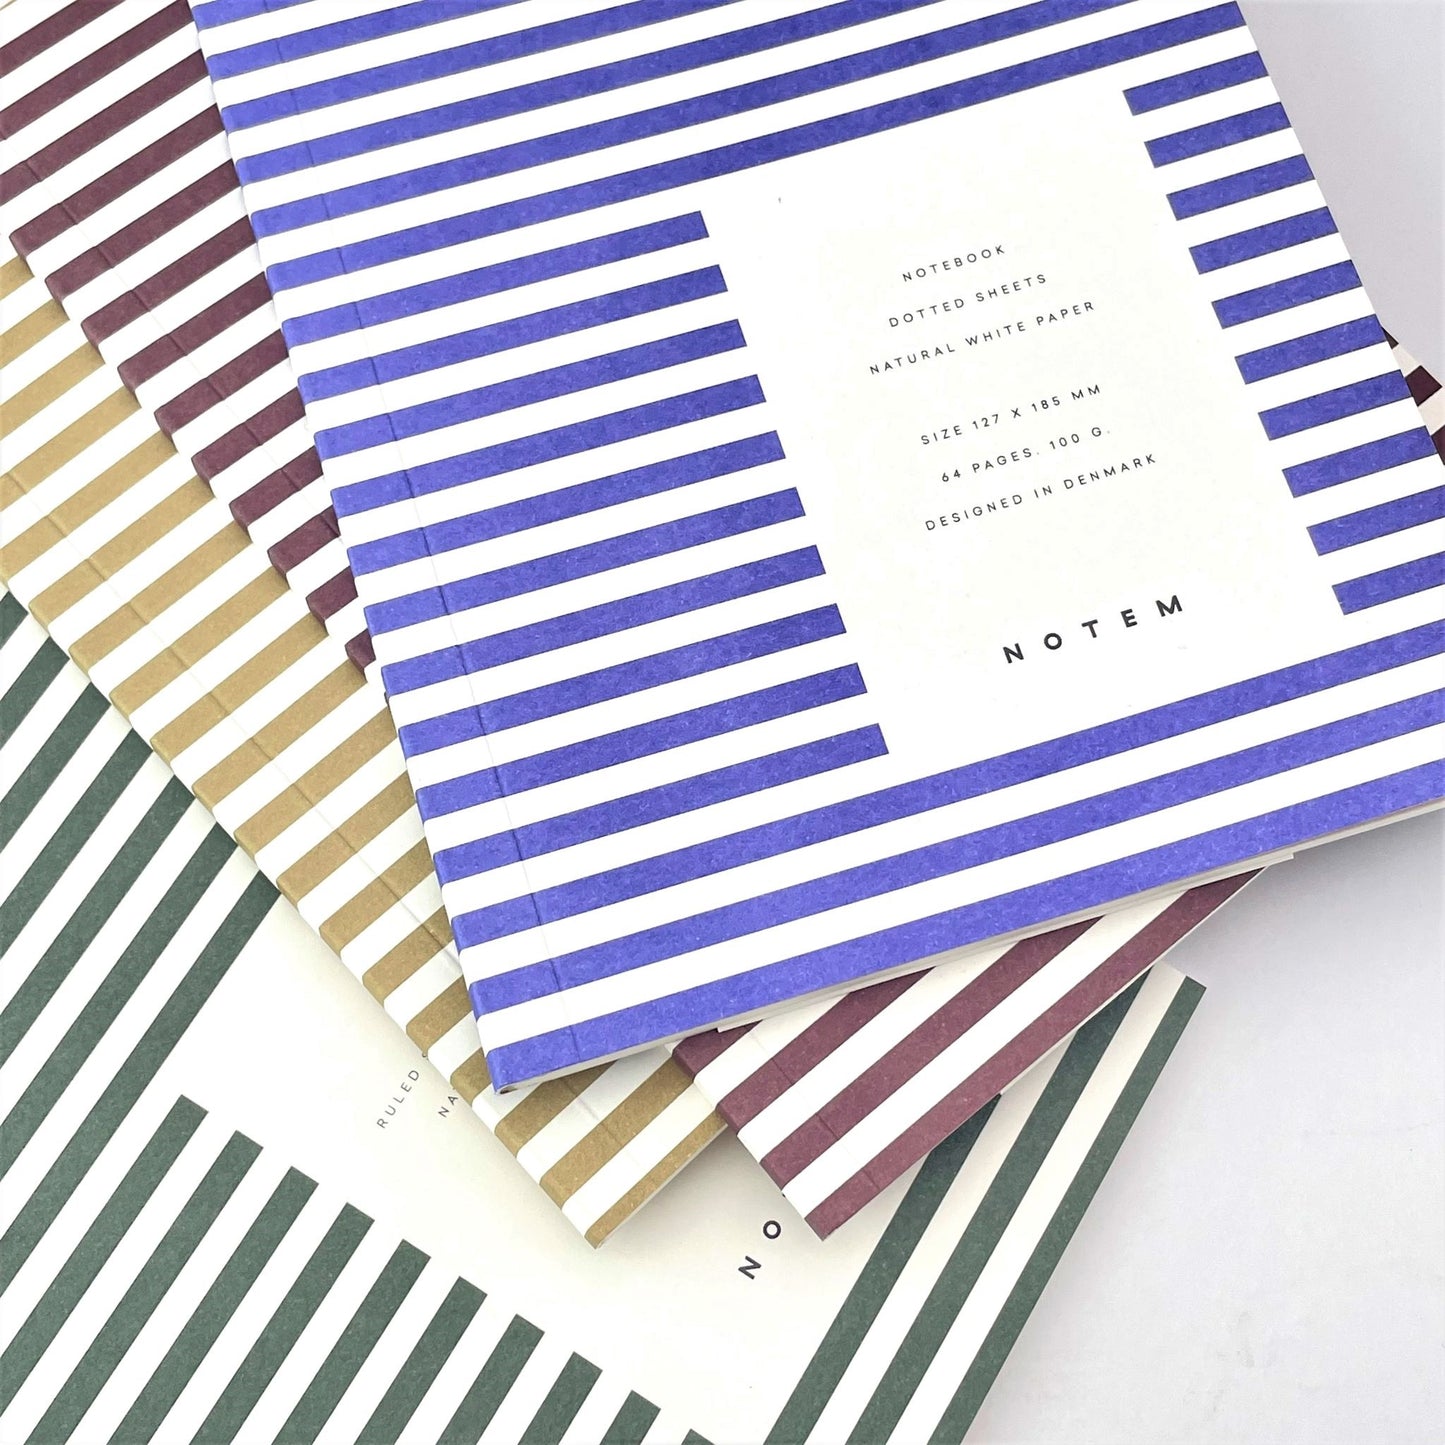 Pocket size notebook with a narrow bright blue and white stripe softcover. pictured with other colour notebooks